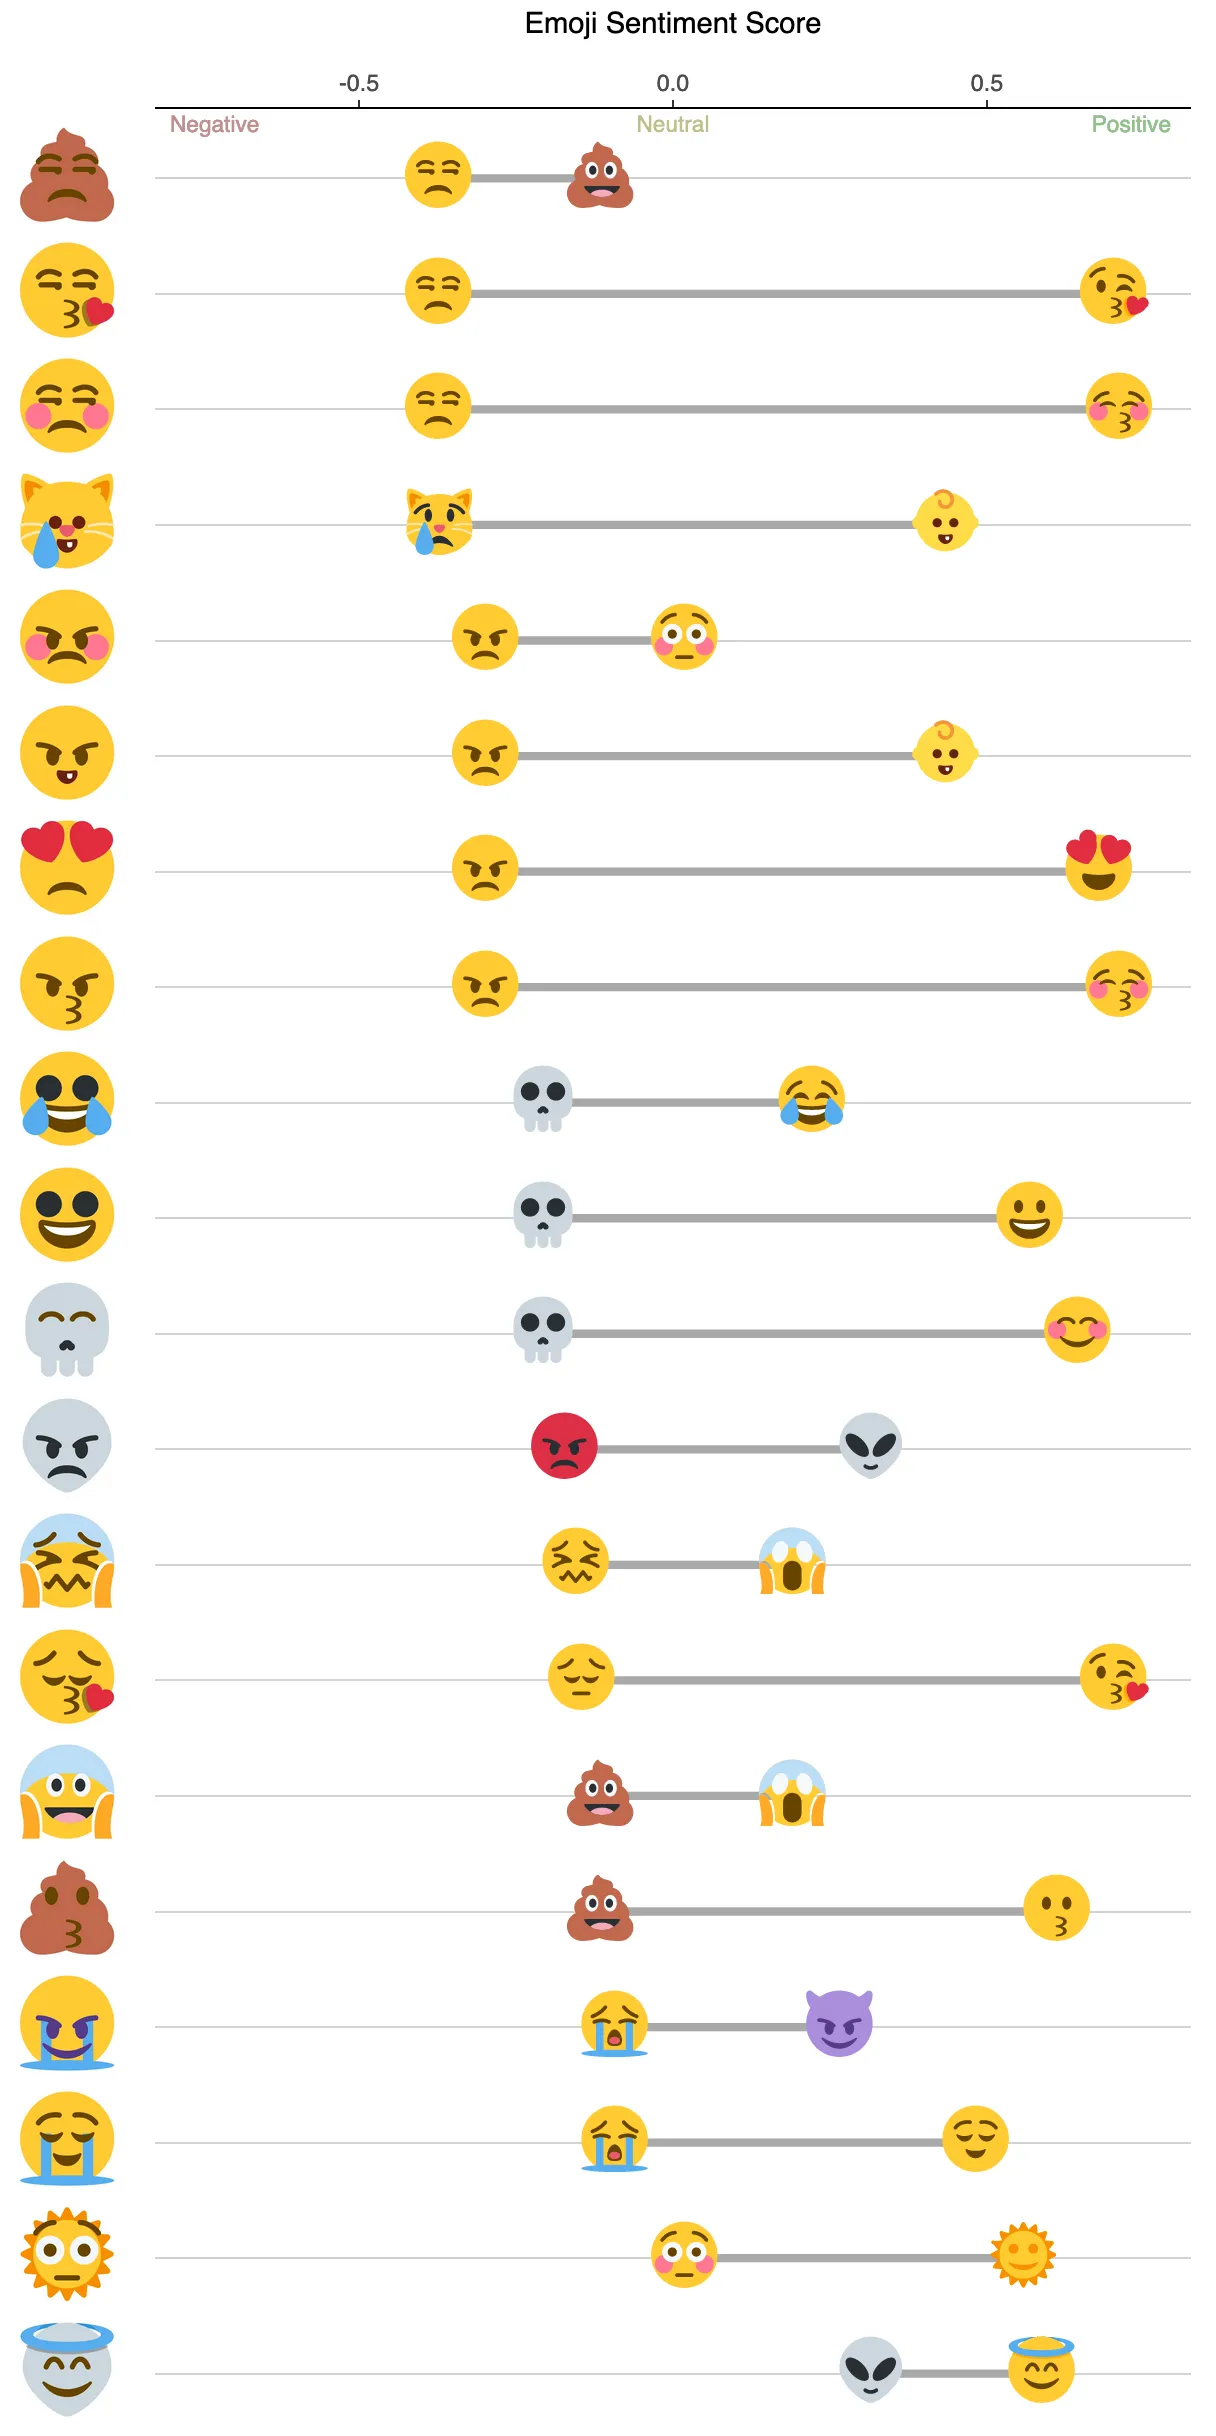 Source emoji sentiment score plotted alongside the resulting mashup (filtered to mashups with a source emoji count of 2)